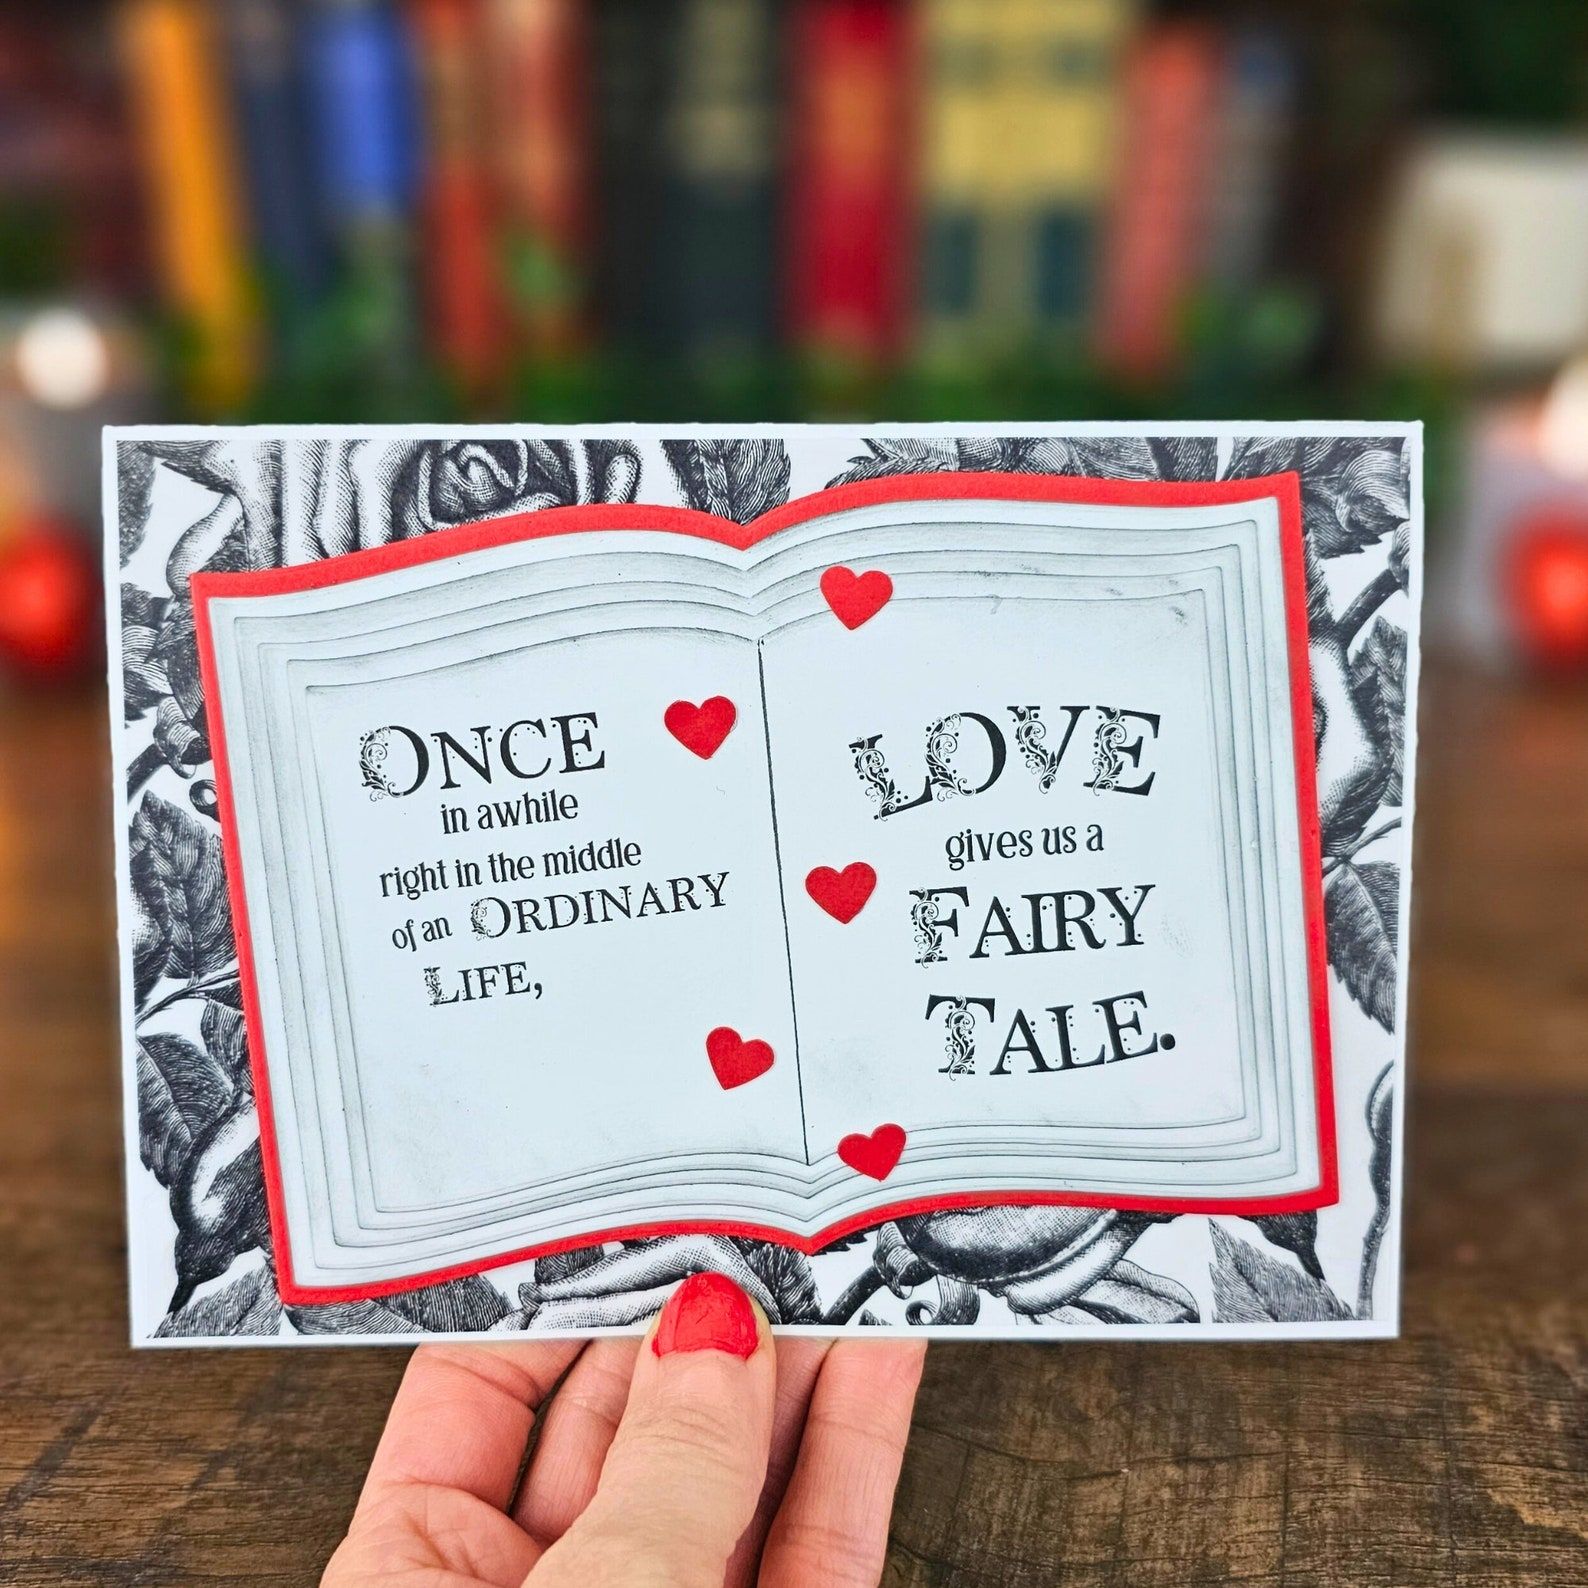 A black, red, and white Valentine of an open book that reads "Once in a while, right in the middle of an ordinary life, love gives us a fairy tale."